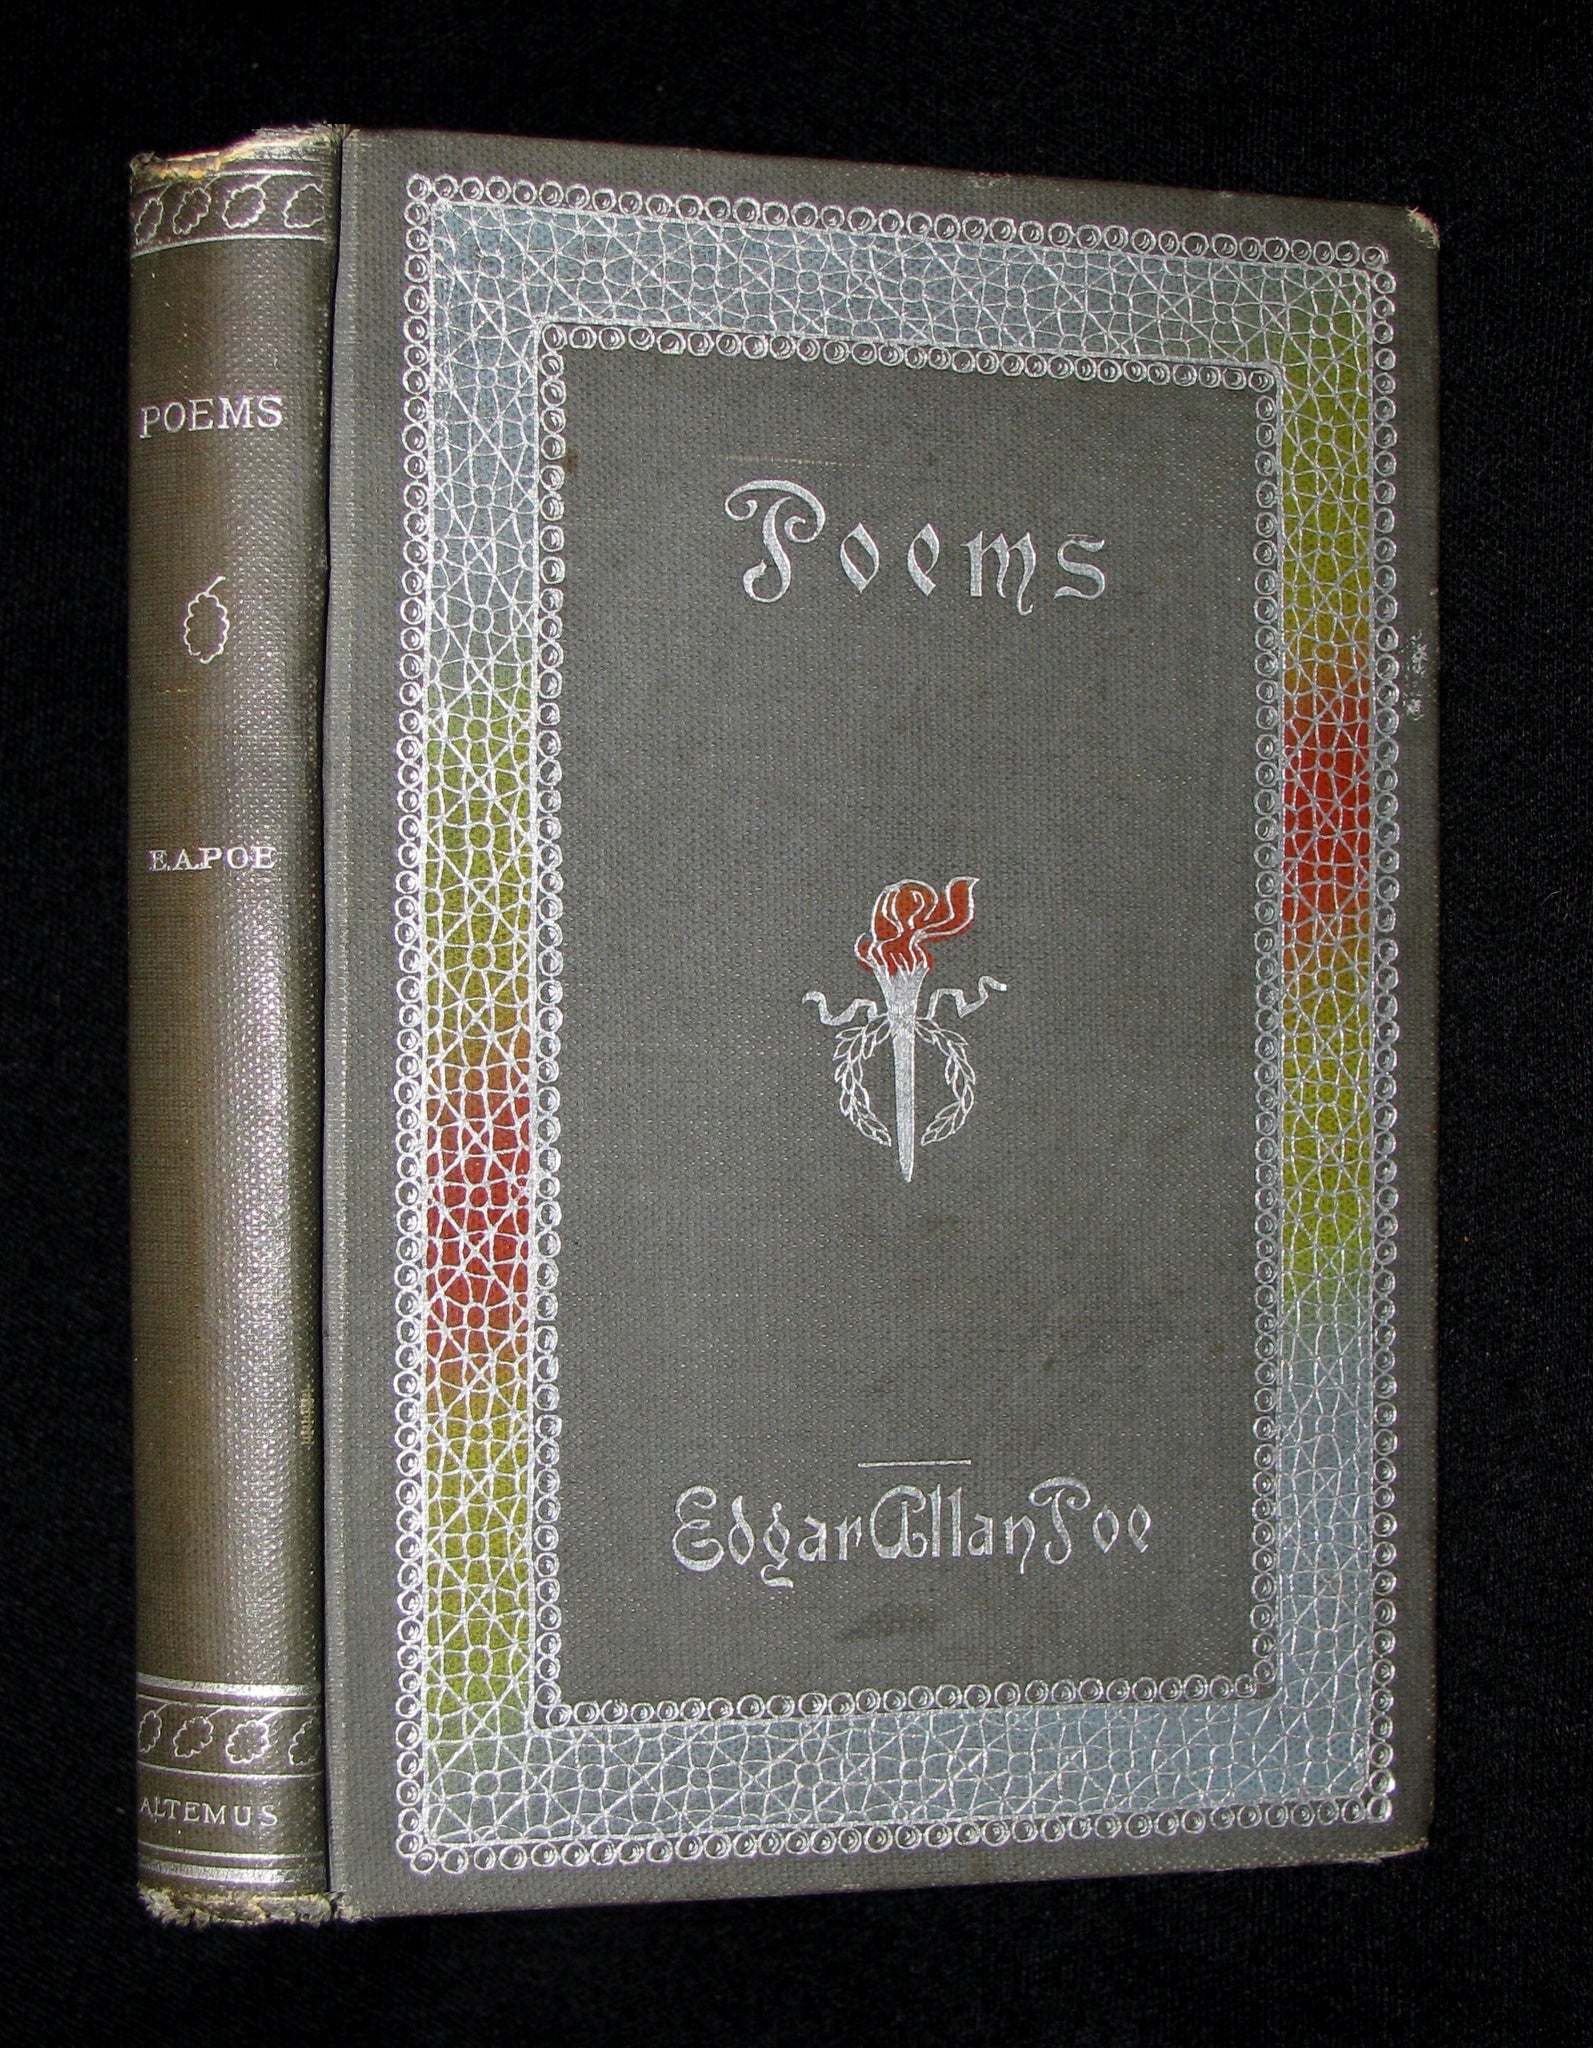 1895 Rare Book - The Raven and other Poems by Edgar Allan POE (Altemus Edition)